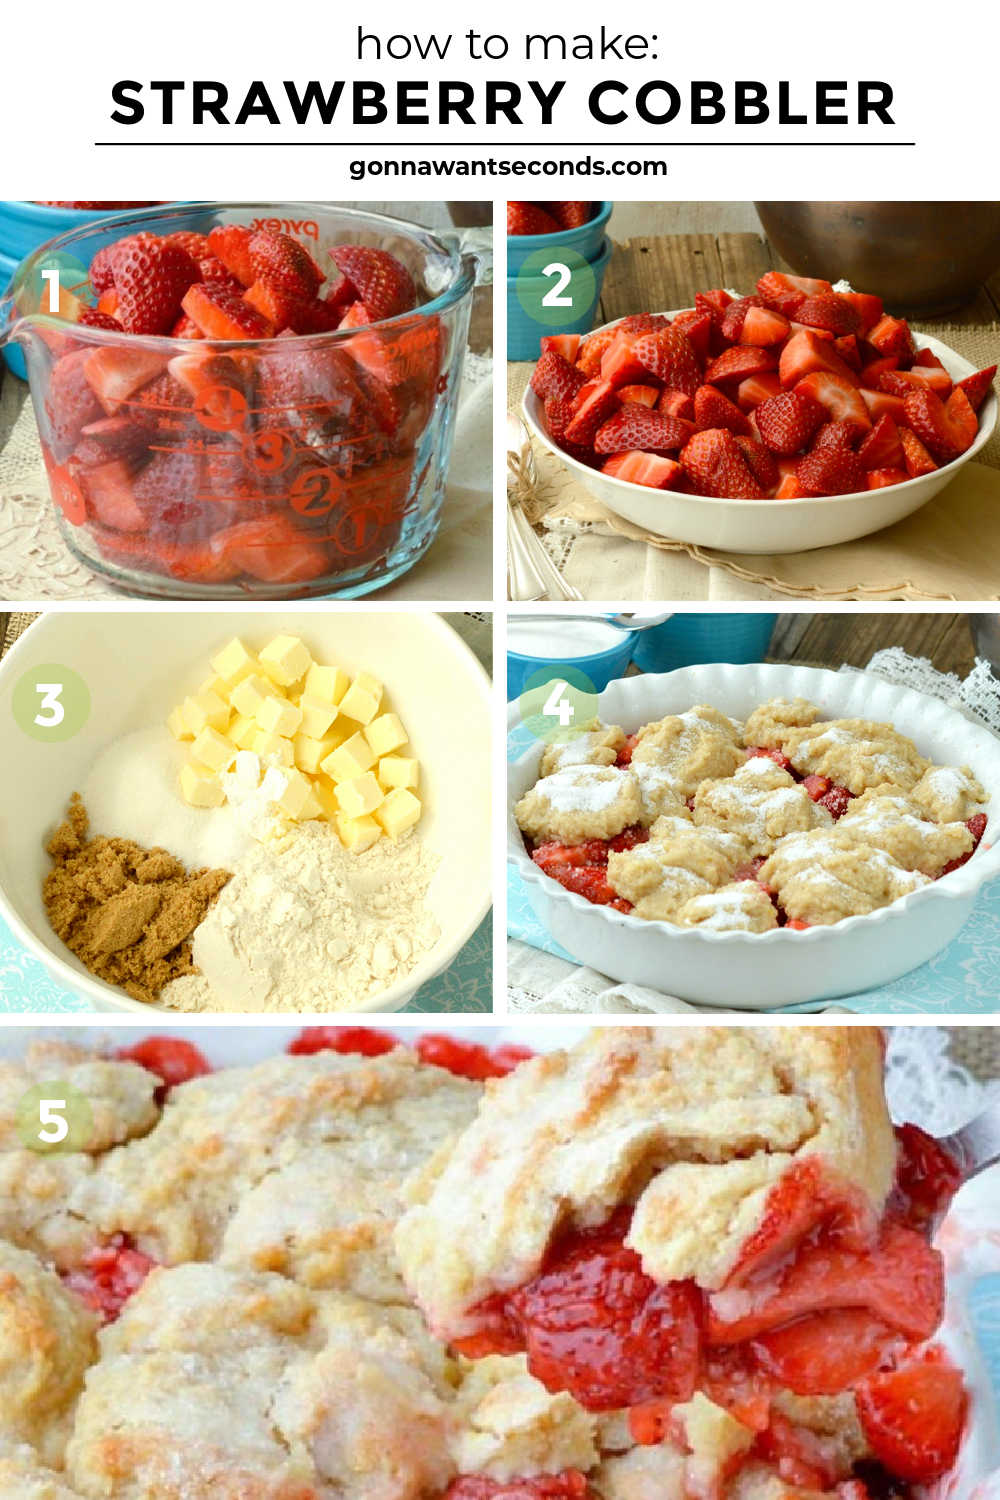 Step by step how to make strawberry cobbler